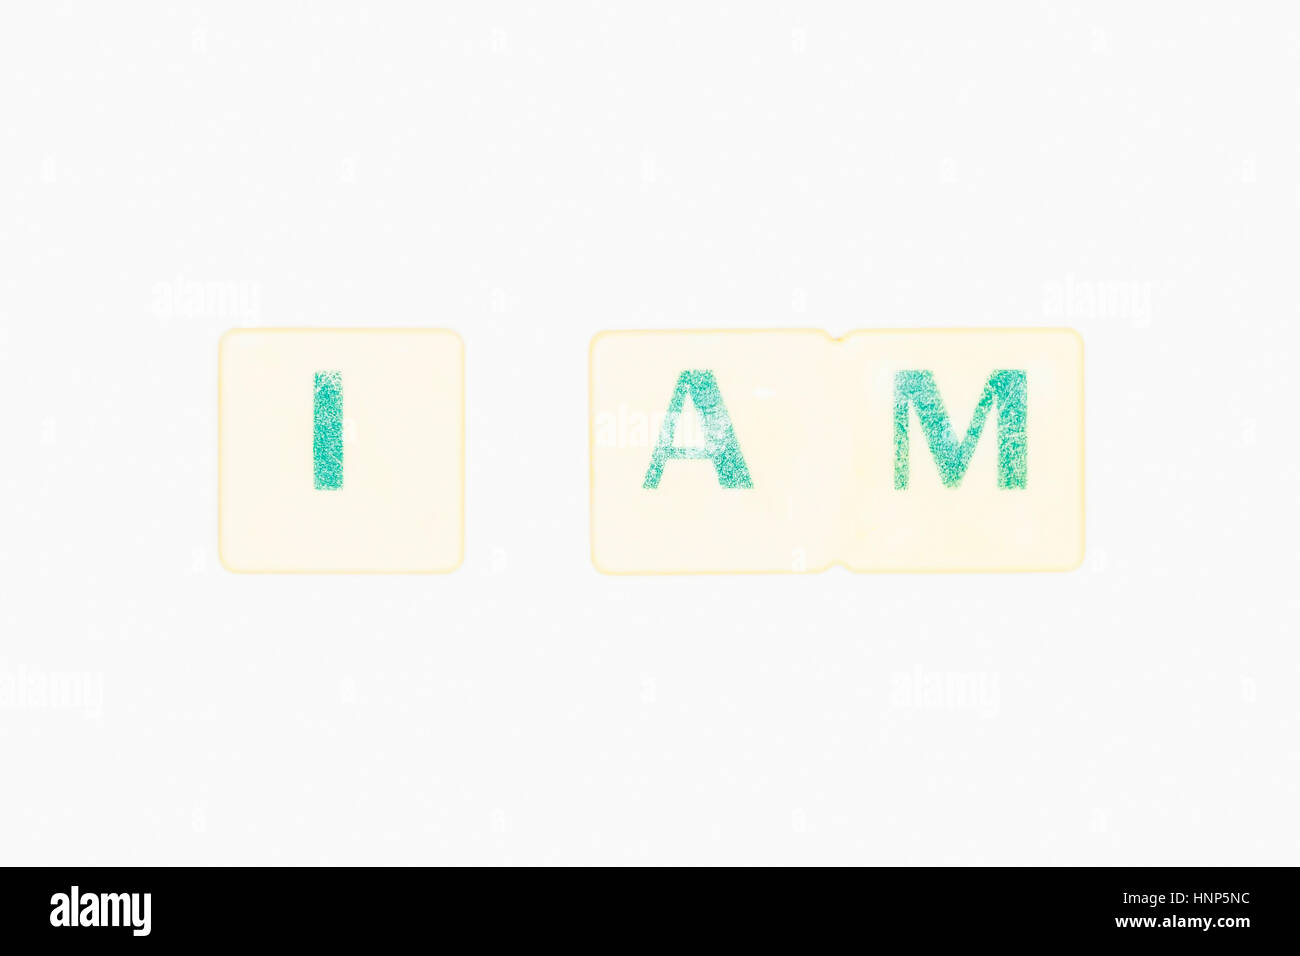 Photo Of Green Letters Forming The Word I Am An English Verb, Word Written On A White Background, Its Basic Meaning Is Exist, Have Being Stock Photo